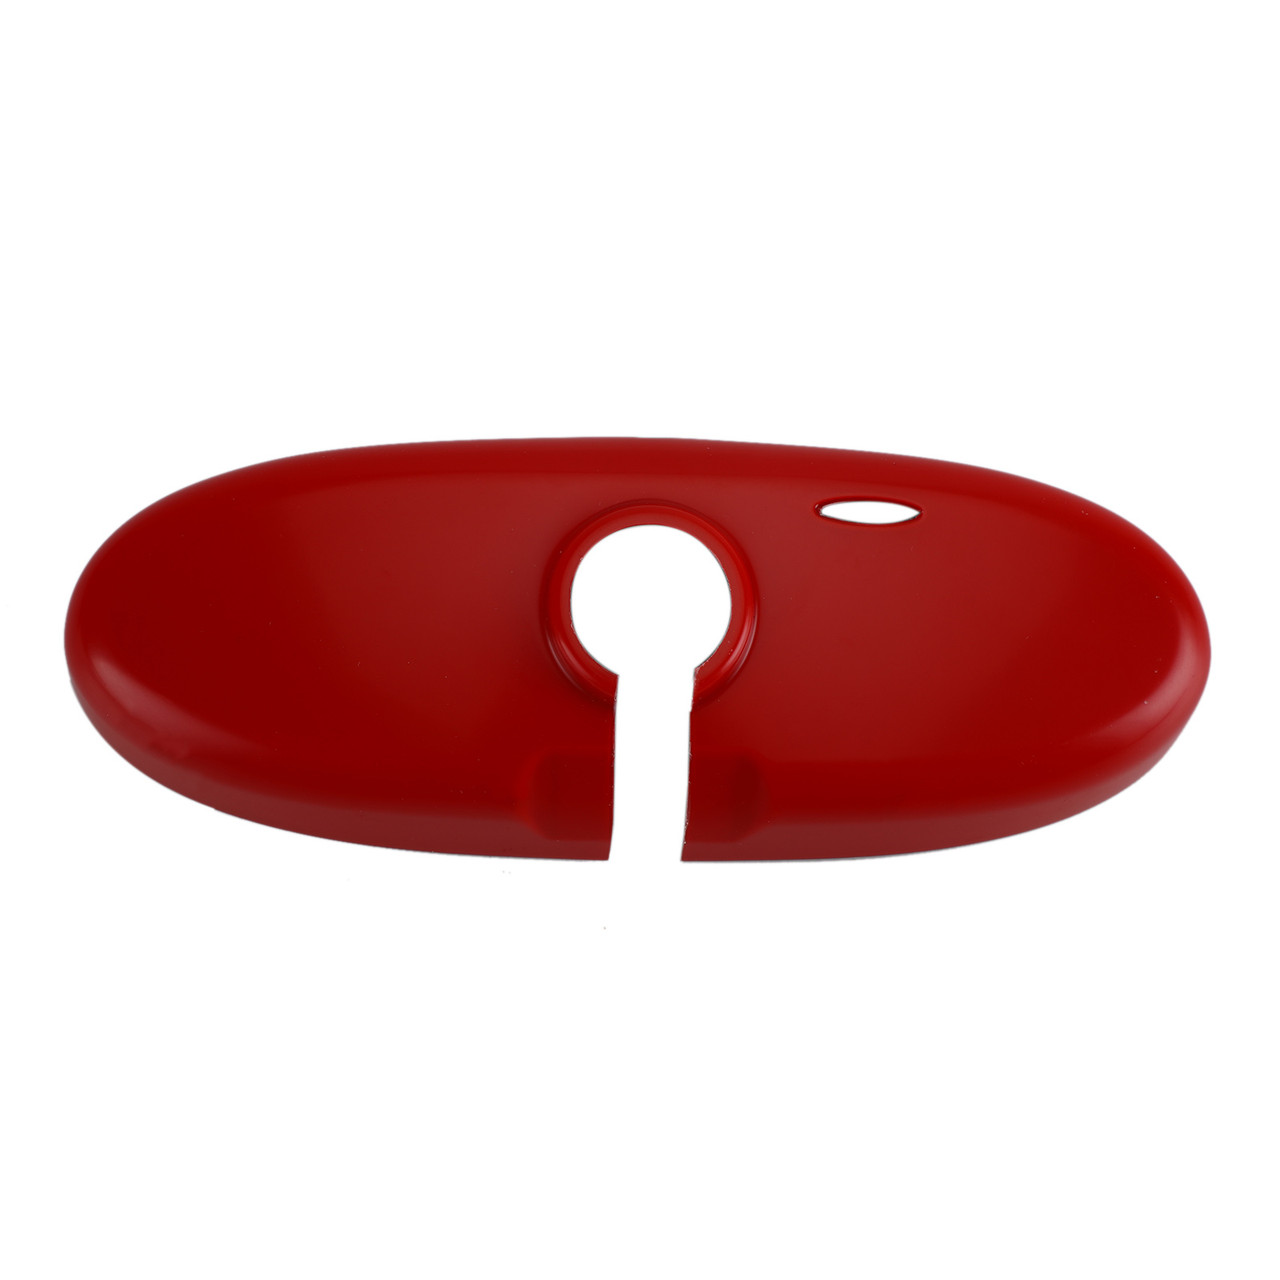 Rear View Mirror Cover Fit For MINI Cooper R55 R56 R57 Red